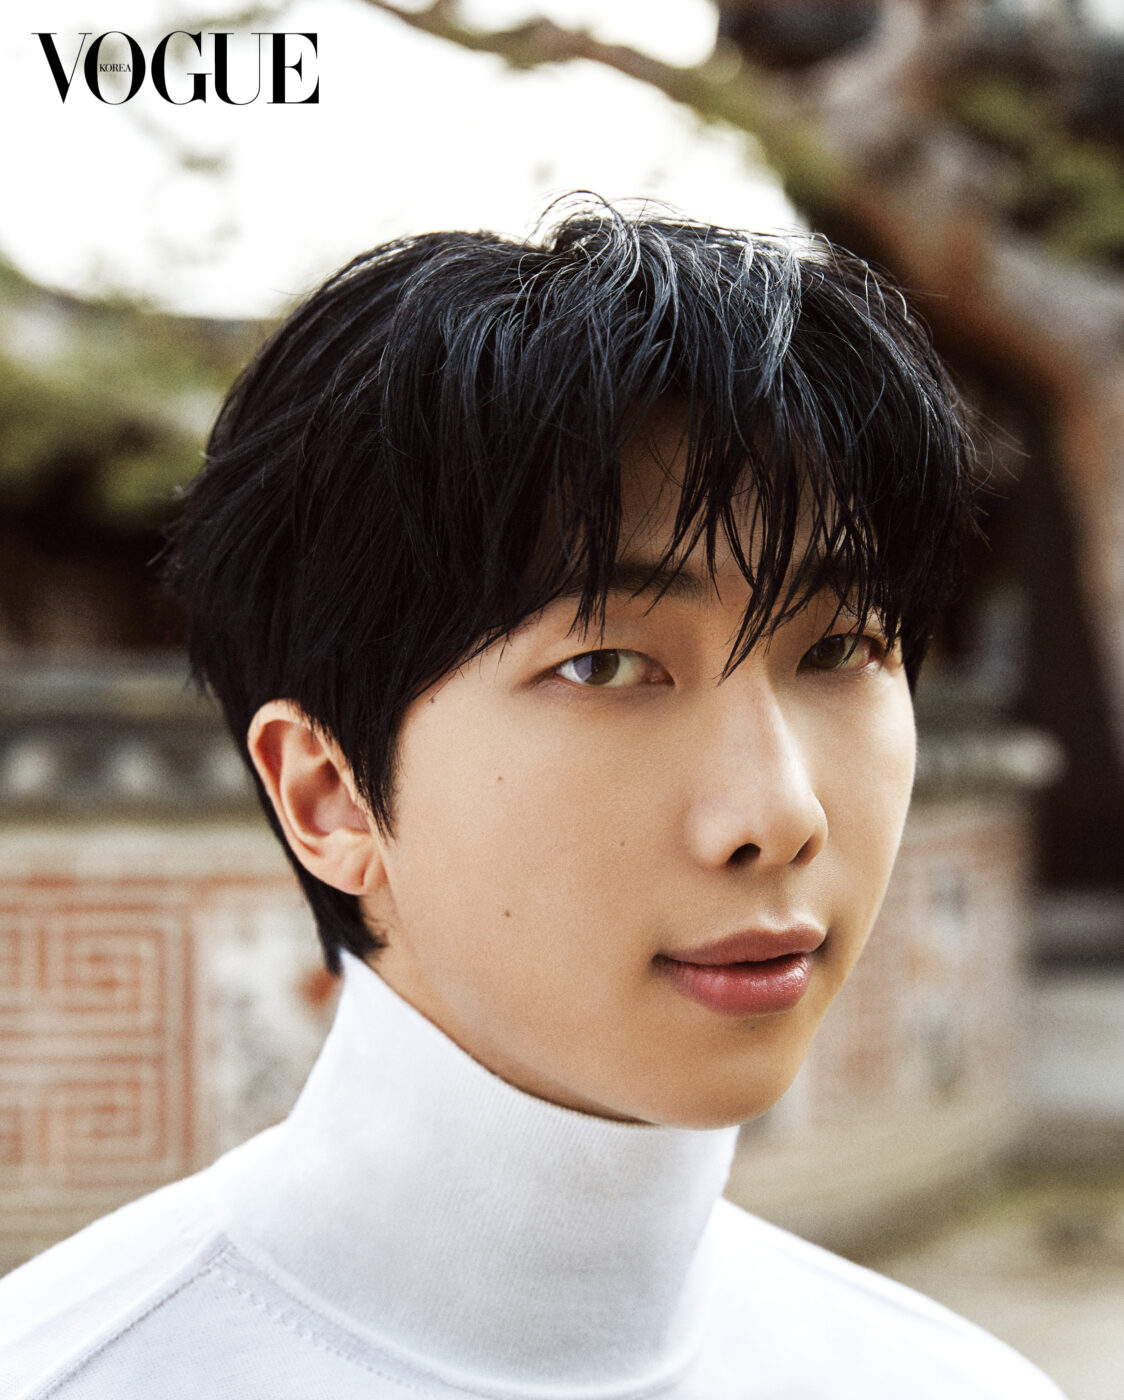 RM from BTS is breathtaking on the cover of Vogue Korea